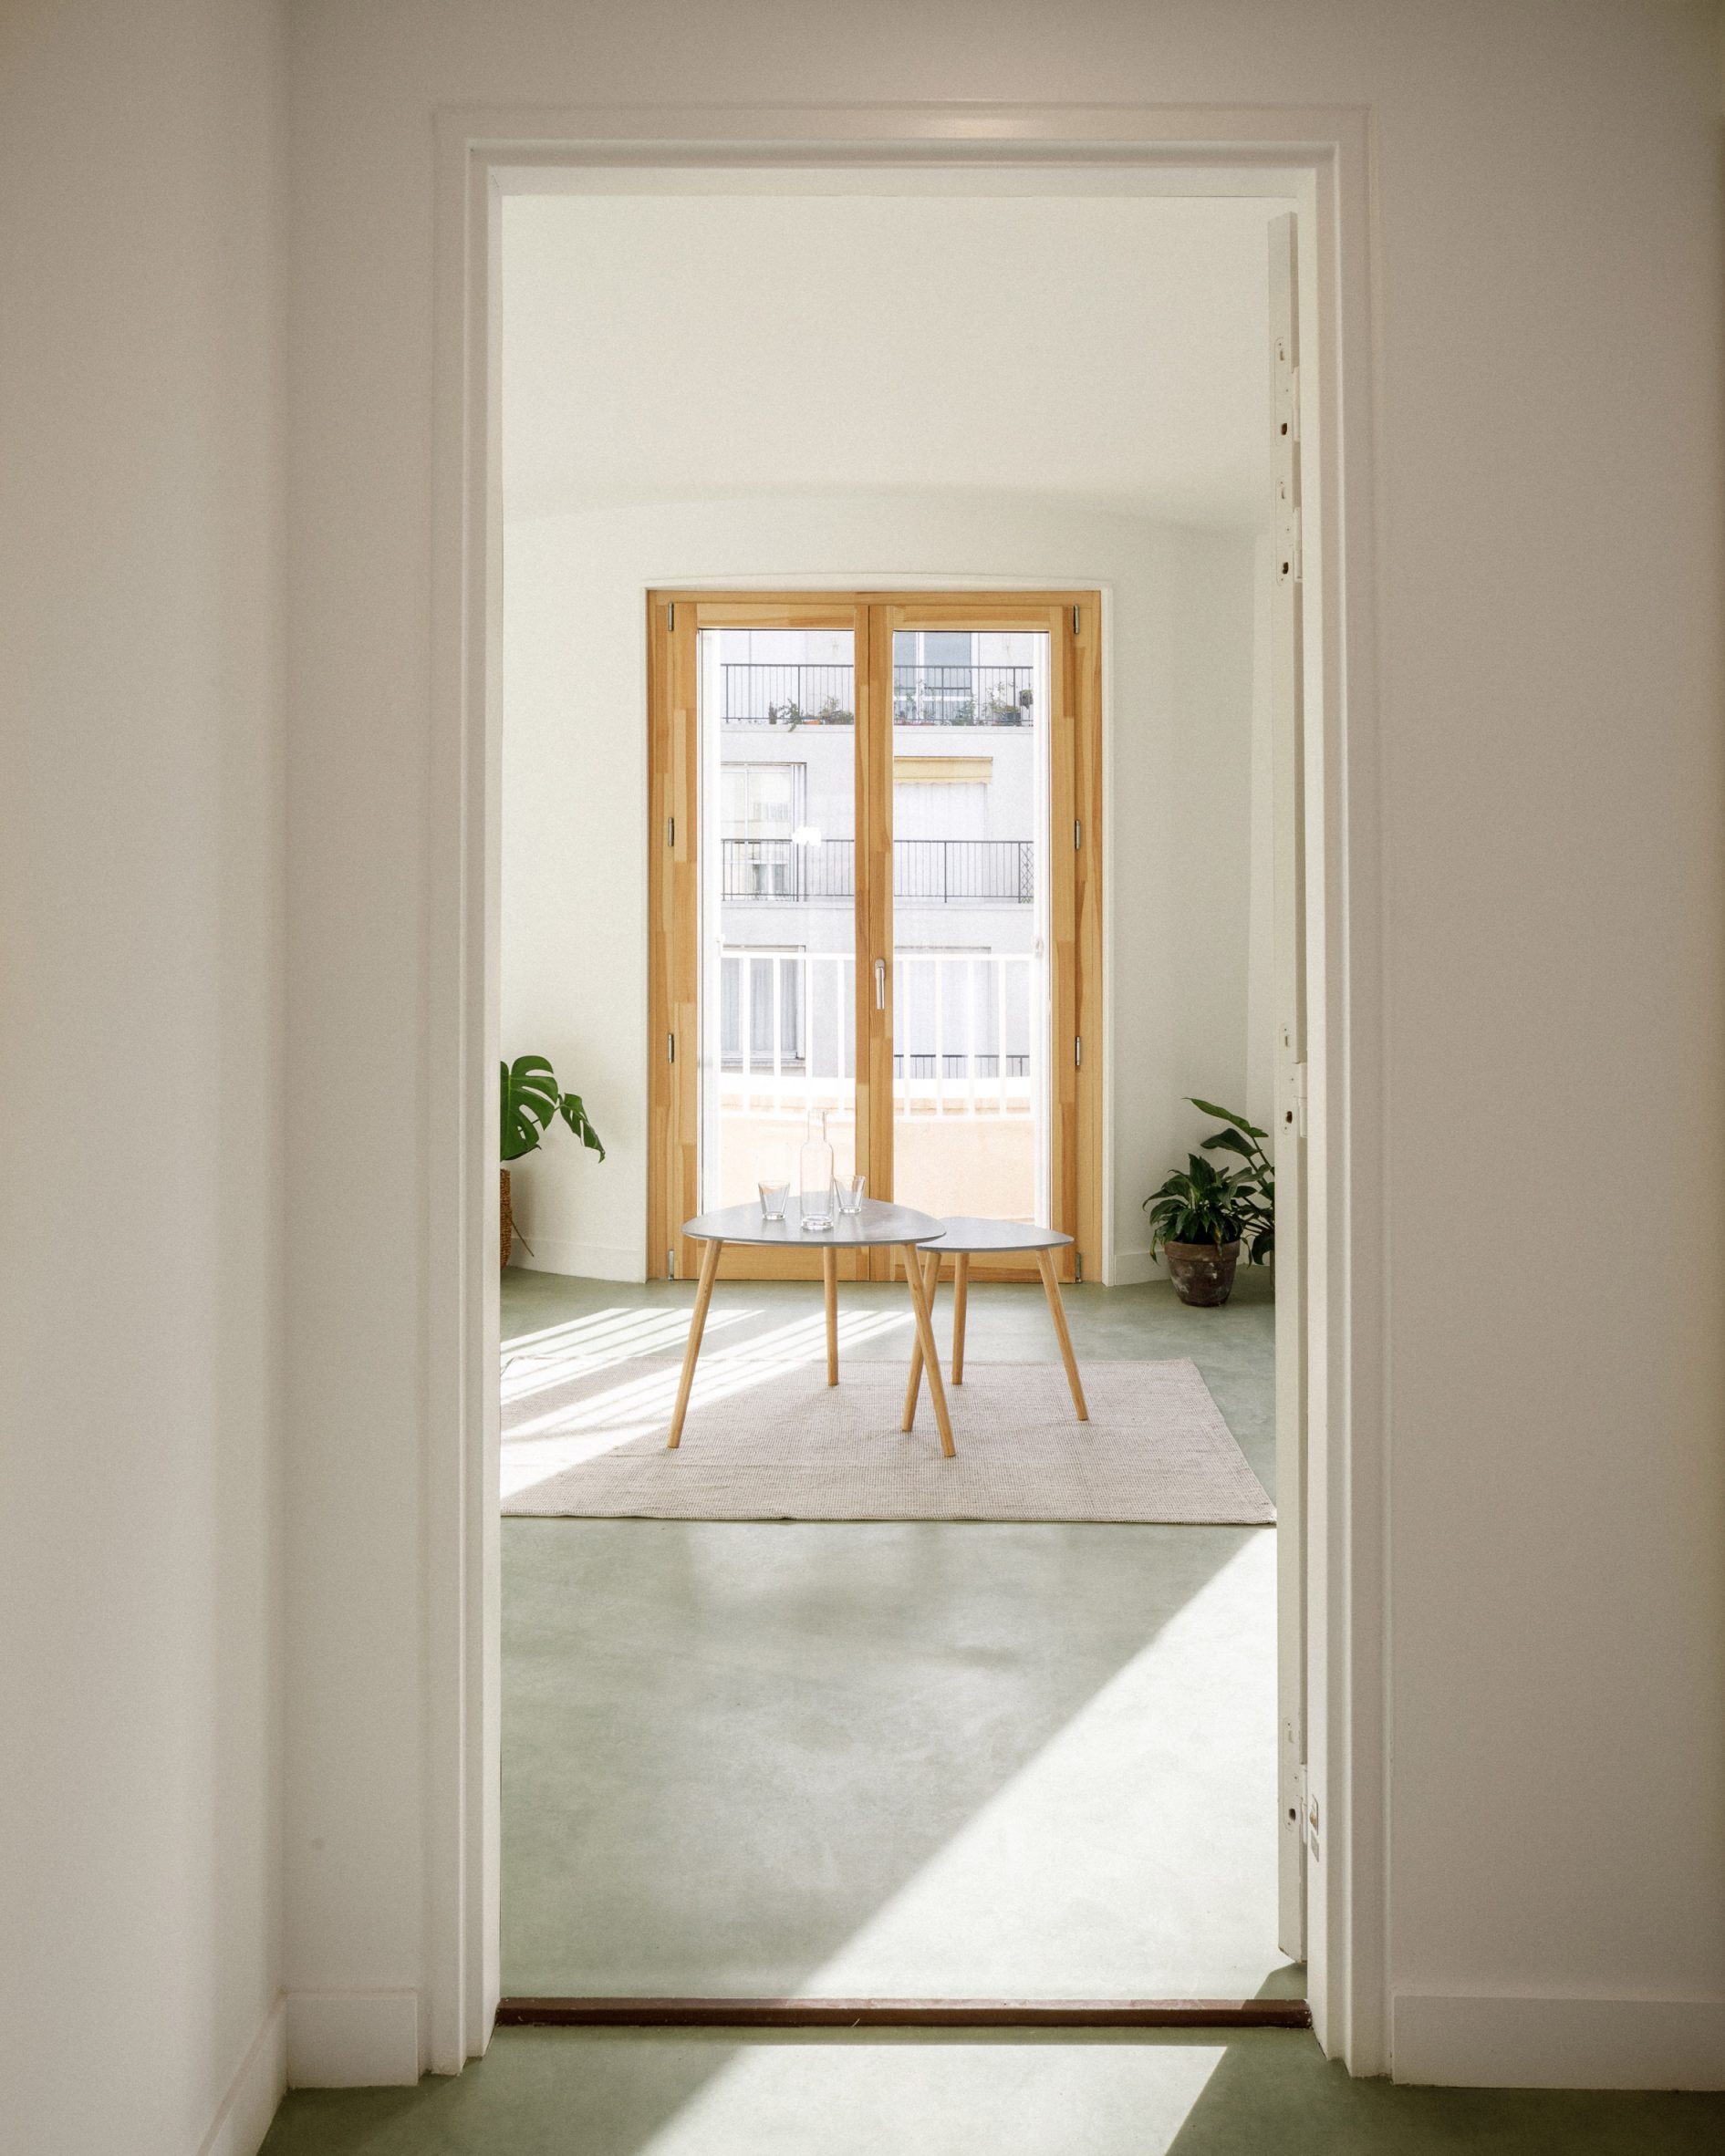 Interior of the 12 Rue Jean-Bart housing project showing white walls, timber door frames and a view from the entrance through the living room and the street-facing window